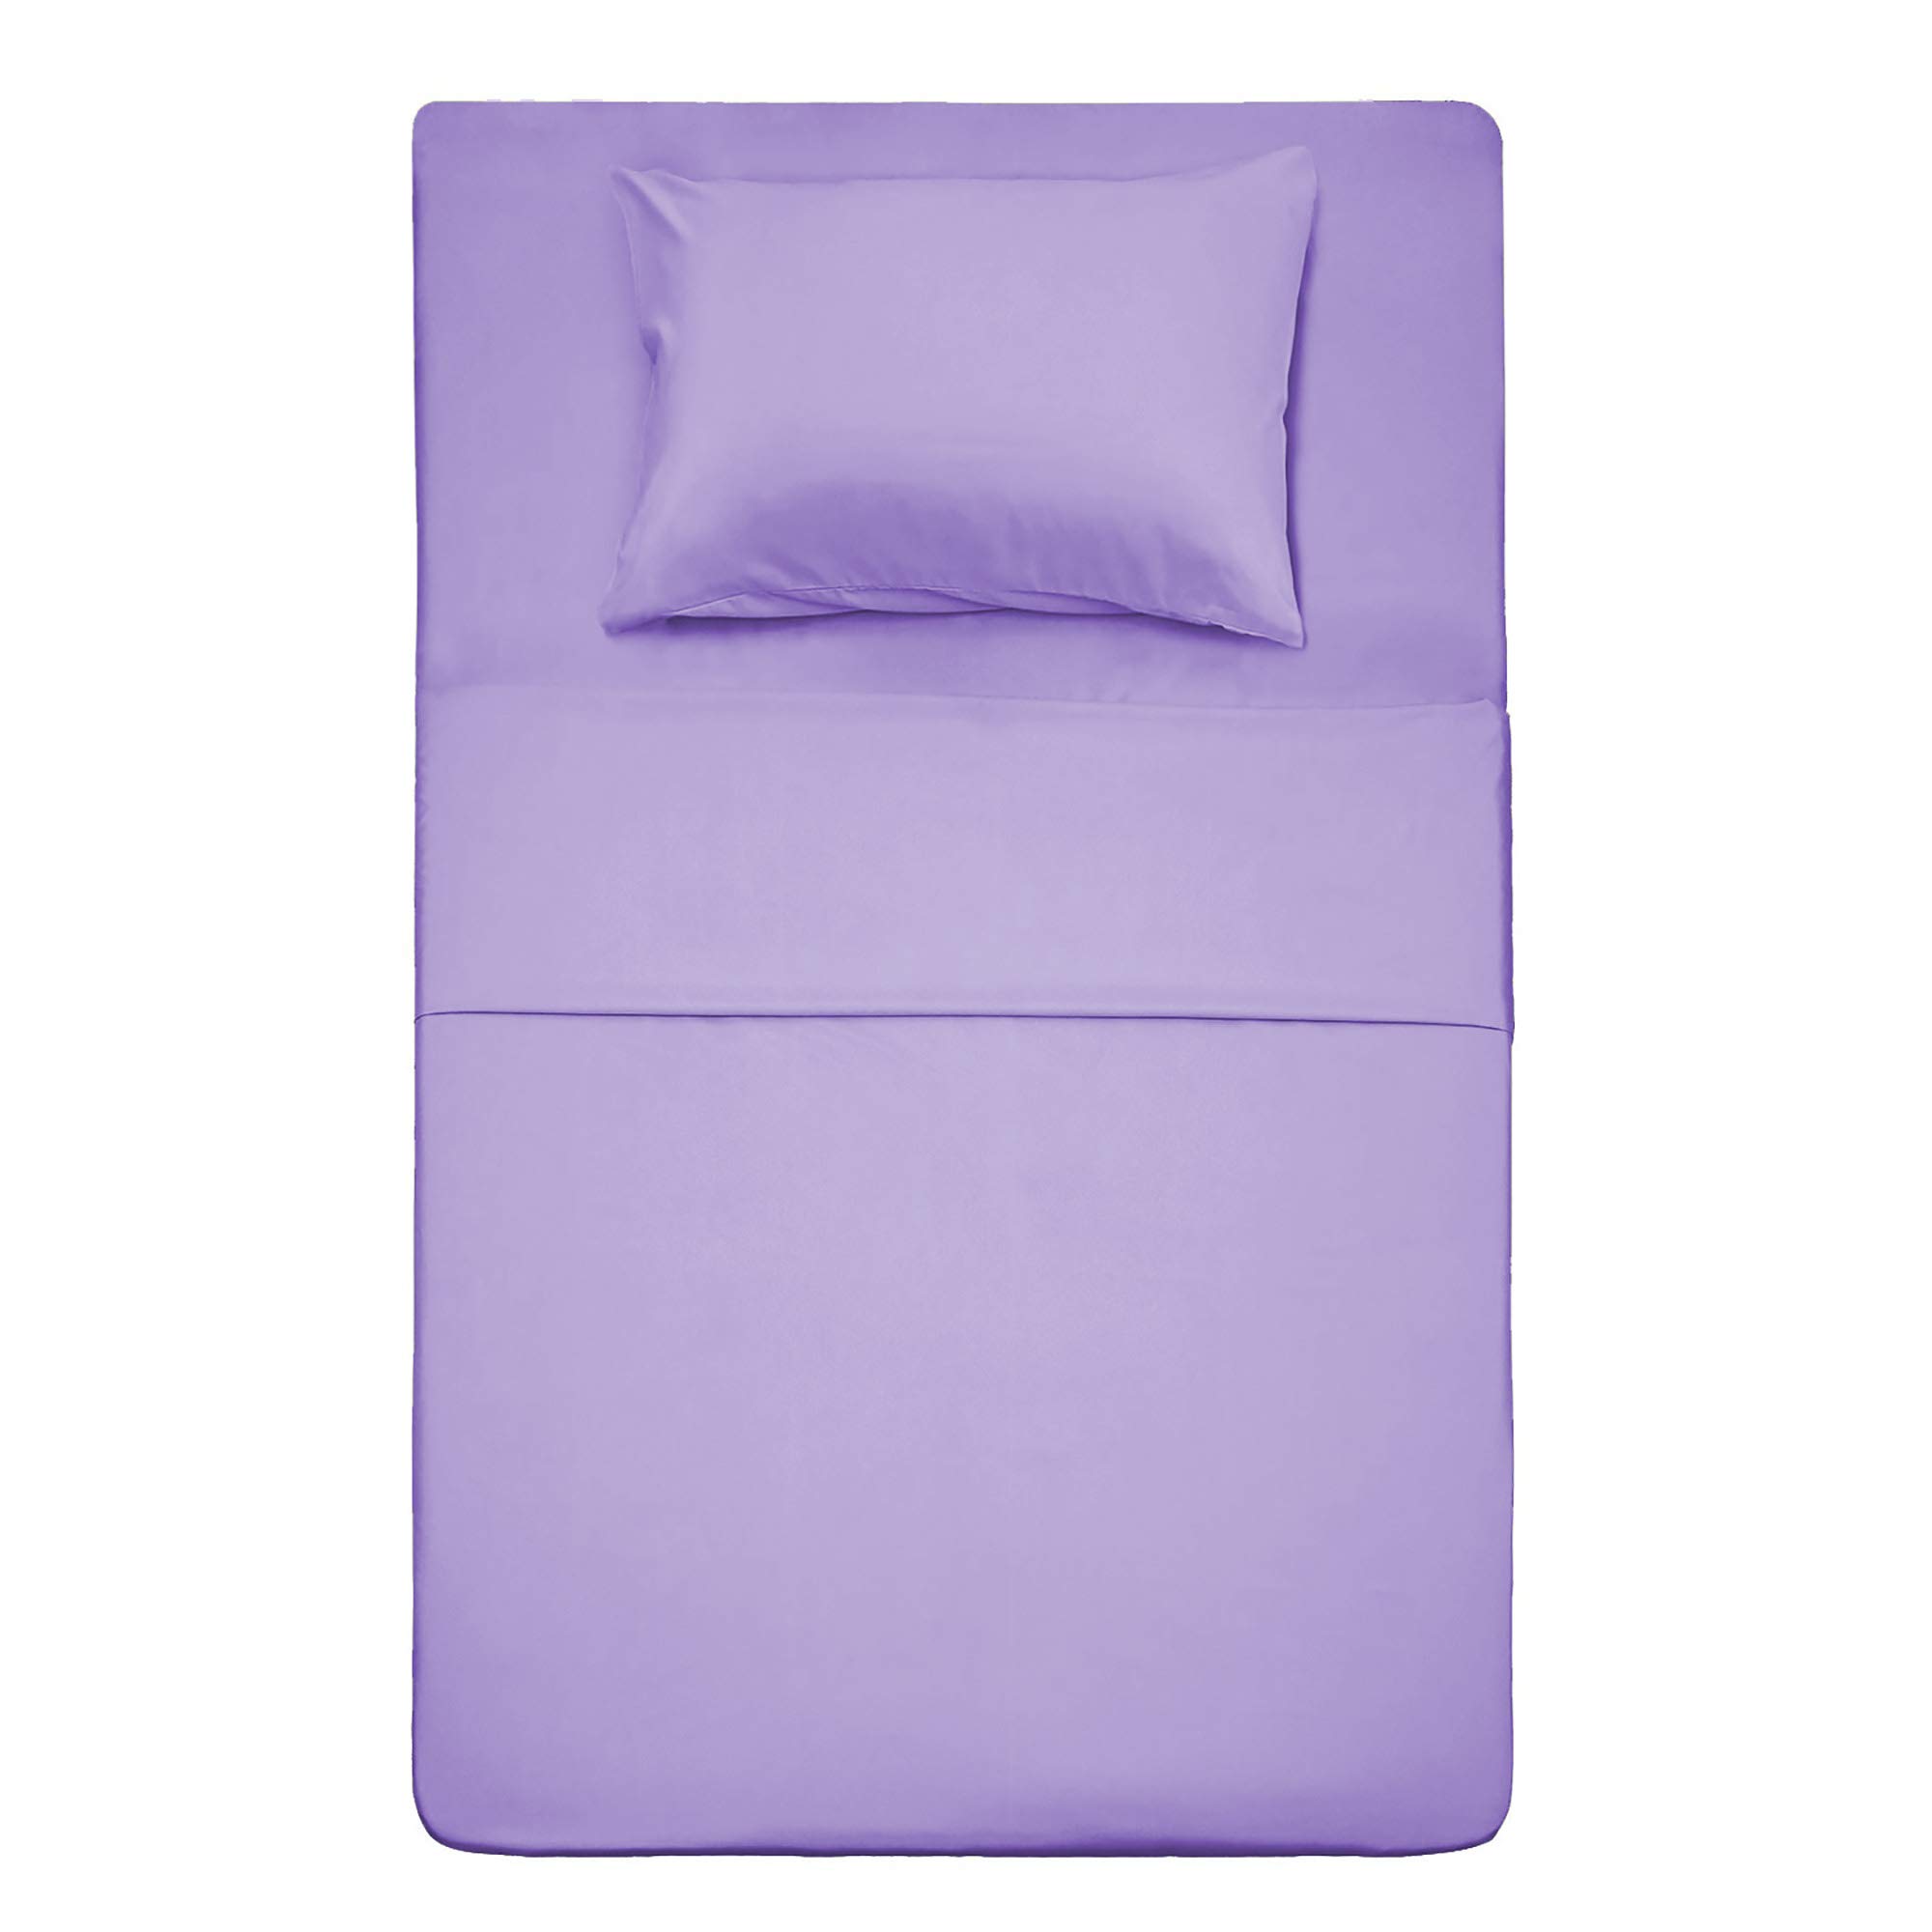 Book Cover Best Season Twin Size Bed Sheet Set - 3 Piece (Lavender) 1 Flat Sheet,1 Fitted Sheet and 1 Pillow Cases,100% Brushed Microfiber 1800 Luxury Bedding,Deep Pockets,Extra Soft & Fade Resistant Lavender Twin